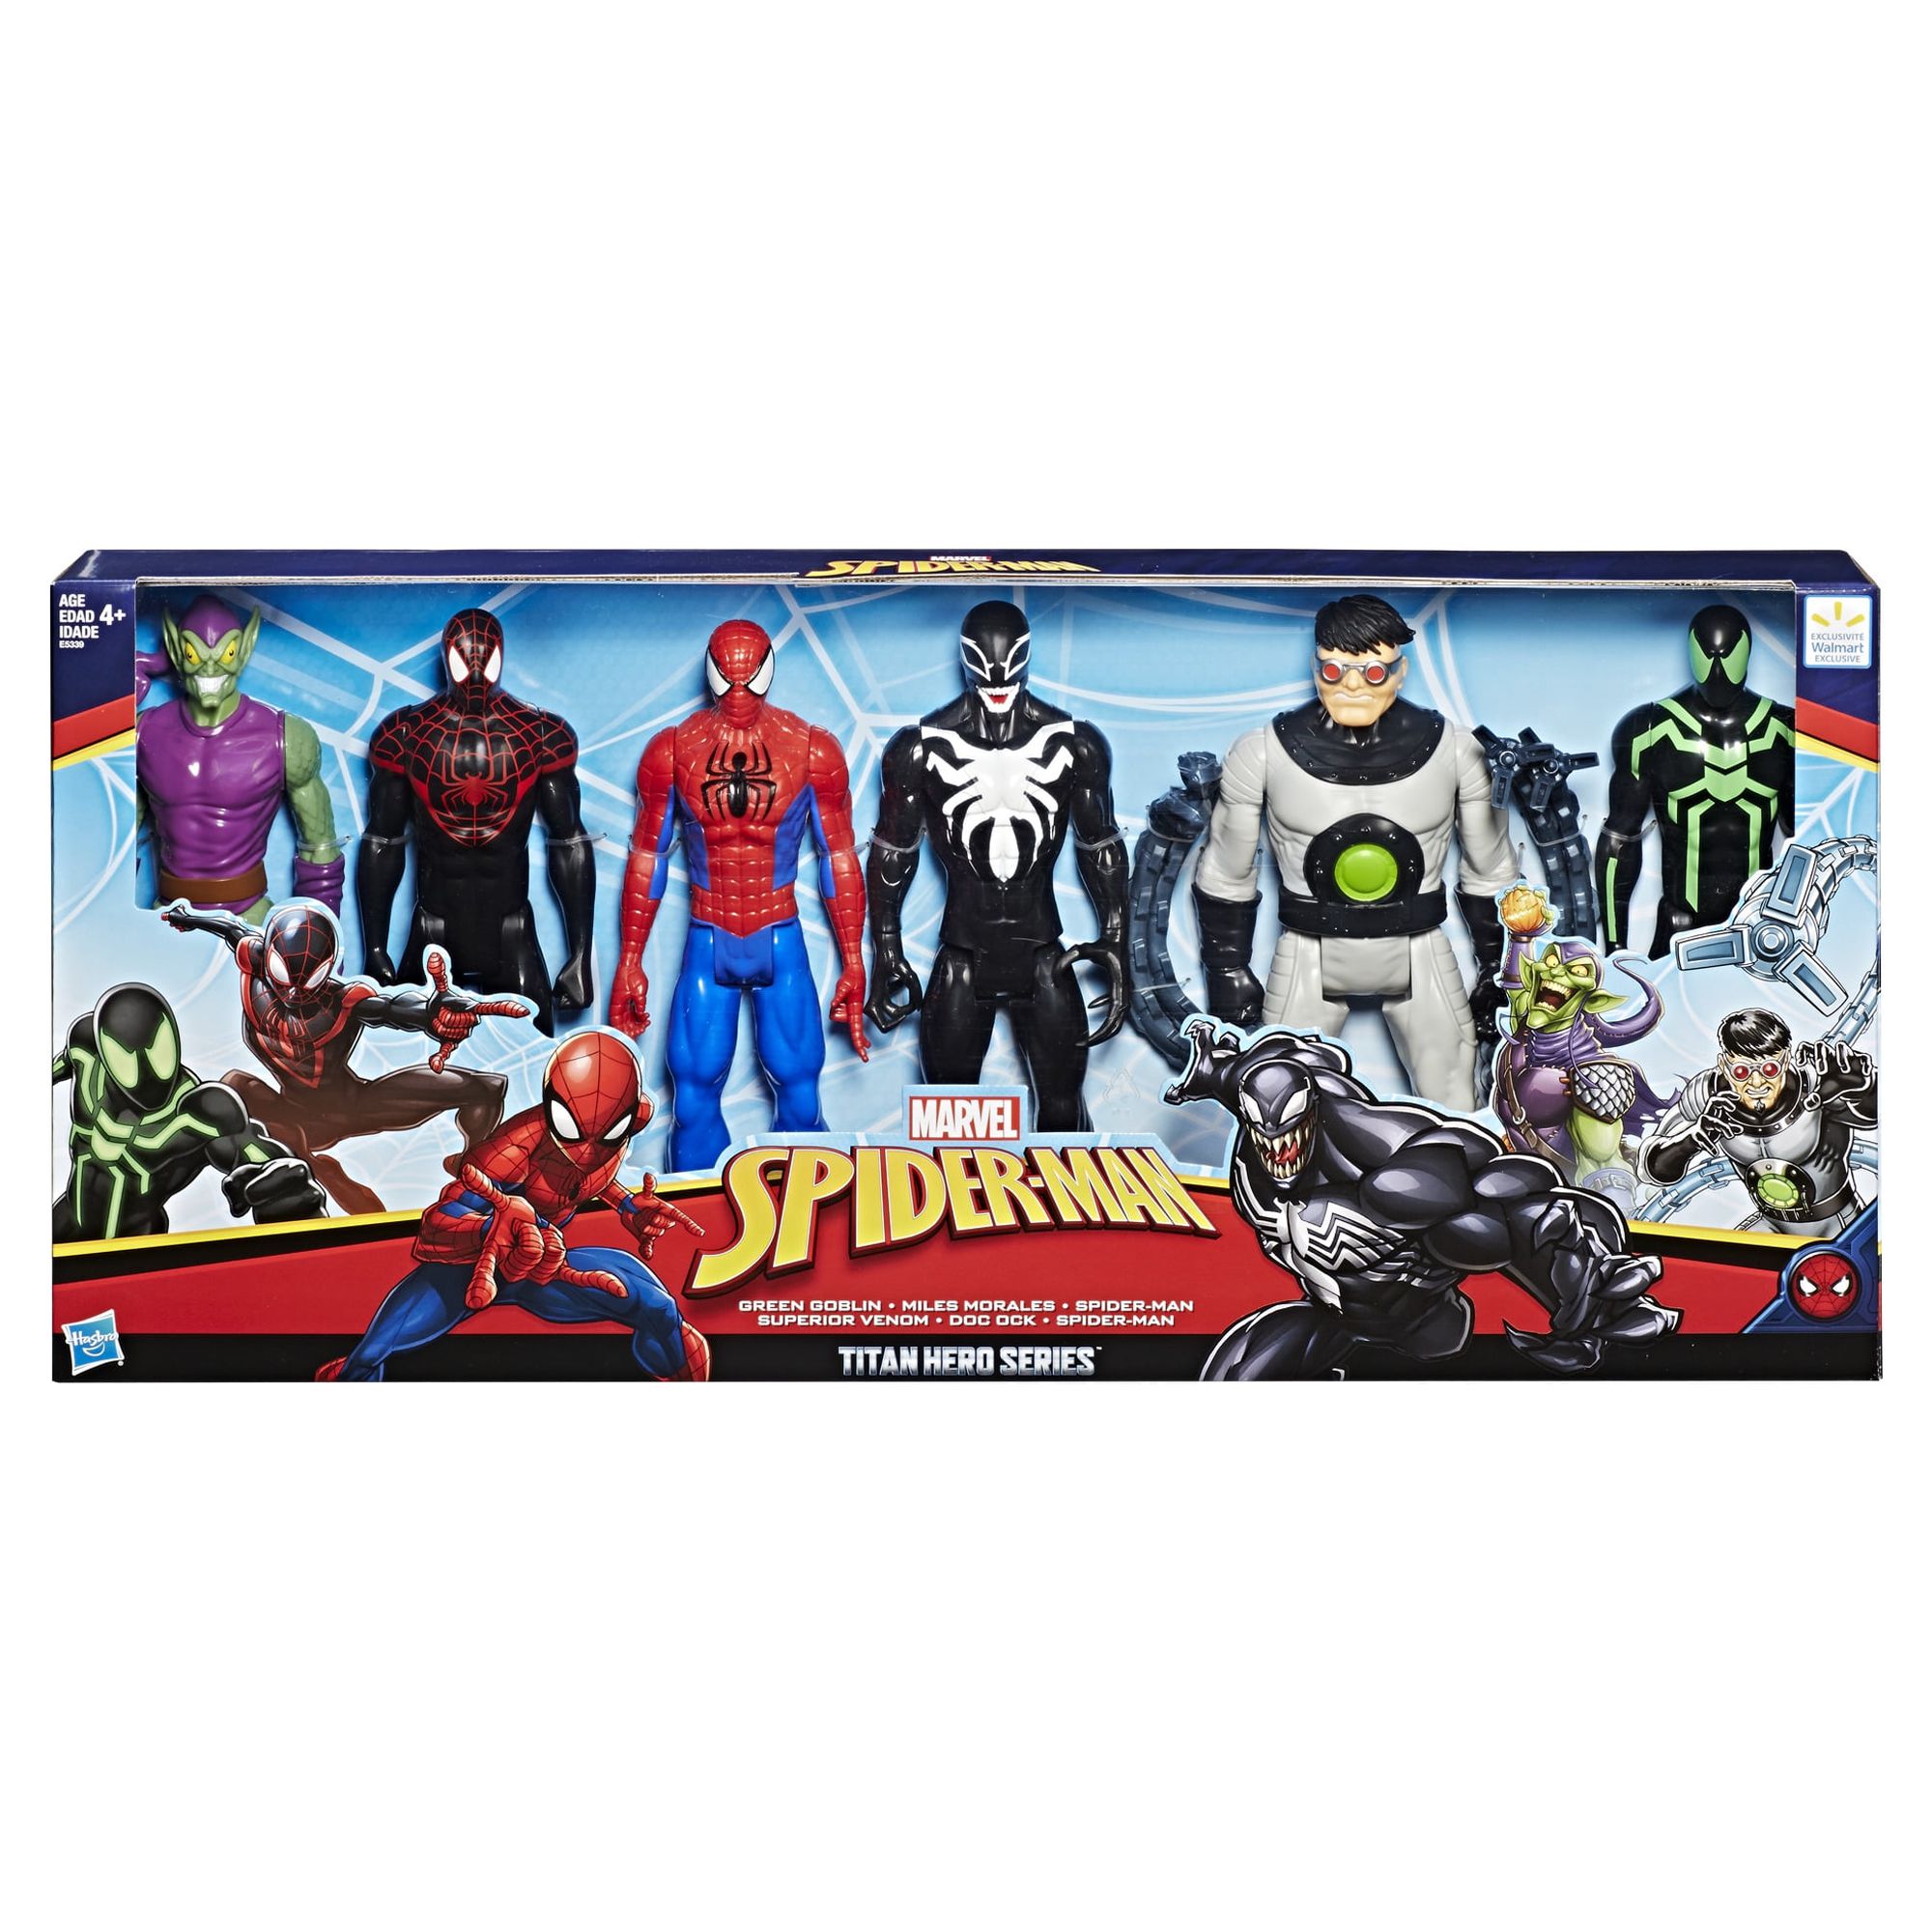 Marvel: Spider-Man Titan Hero Series Kids Toy Action Figure Set for Boys and Girls Ages 4 5 6 7 8 and Up, 6 Pieces - image 2 of 2